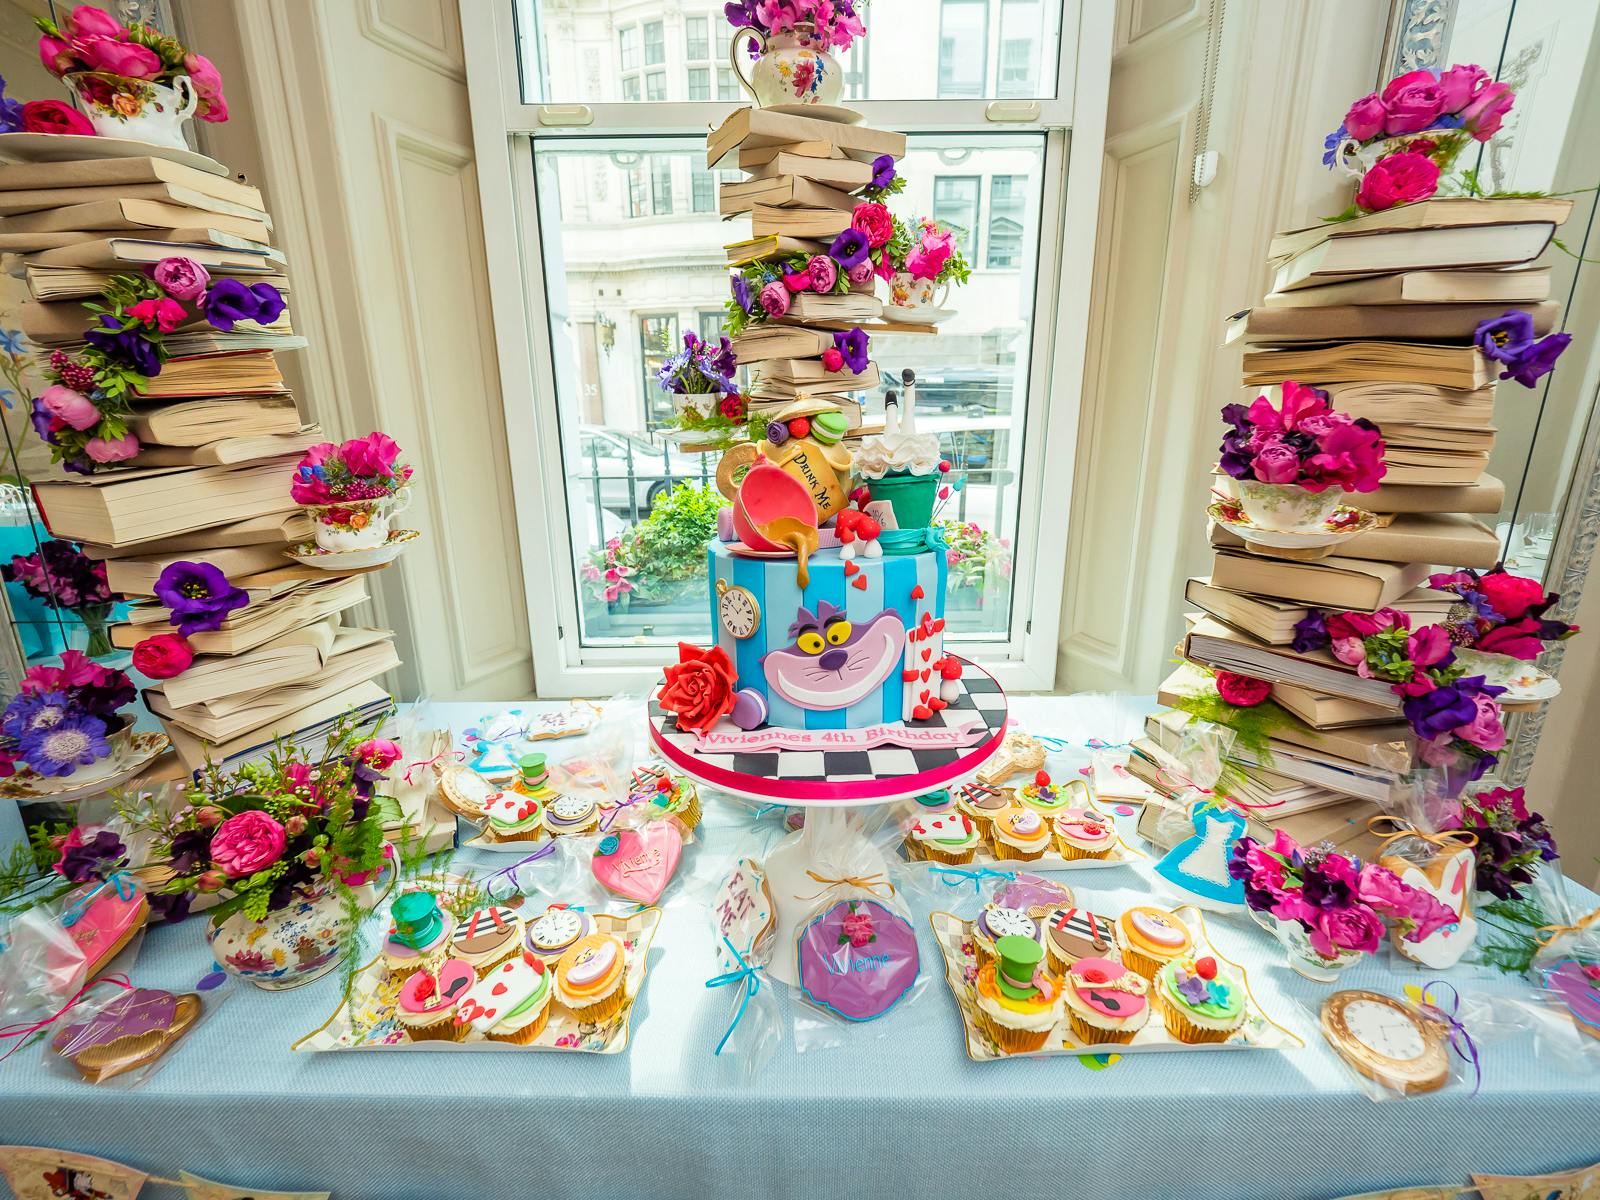 Kids 4th Birthday Alice in Wonderland Themed Tea Party Celebration with Mad Hatter and Chesire Cat Tiered Cake with Books On Top | PartySlate